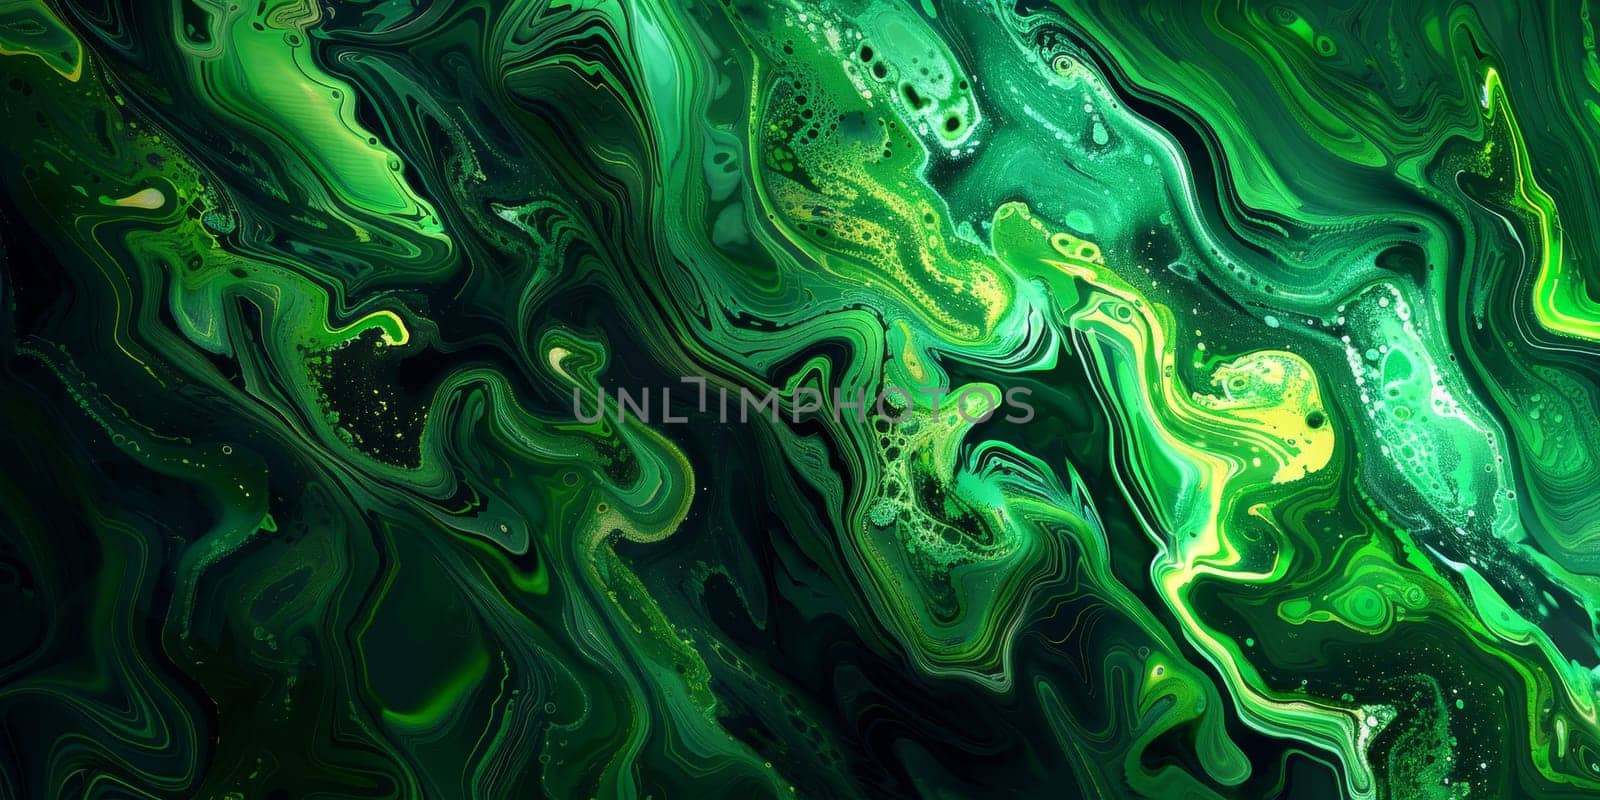 Green and black swirls and shapes in abstract painting by Kadula